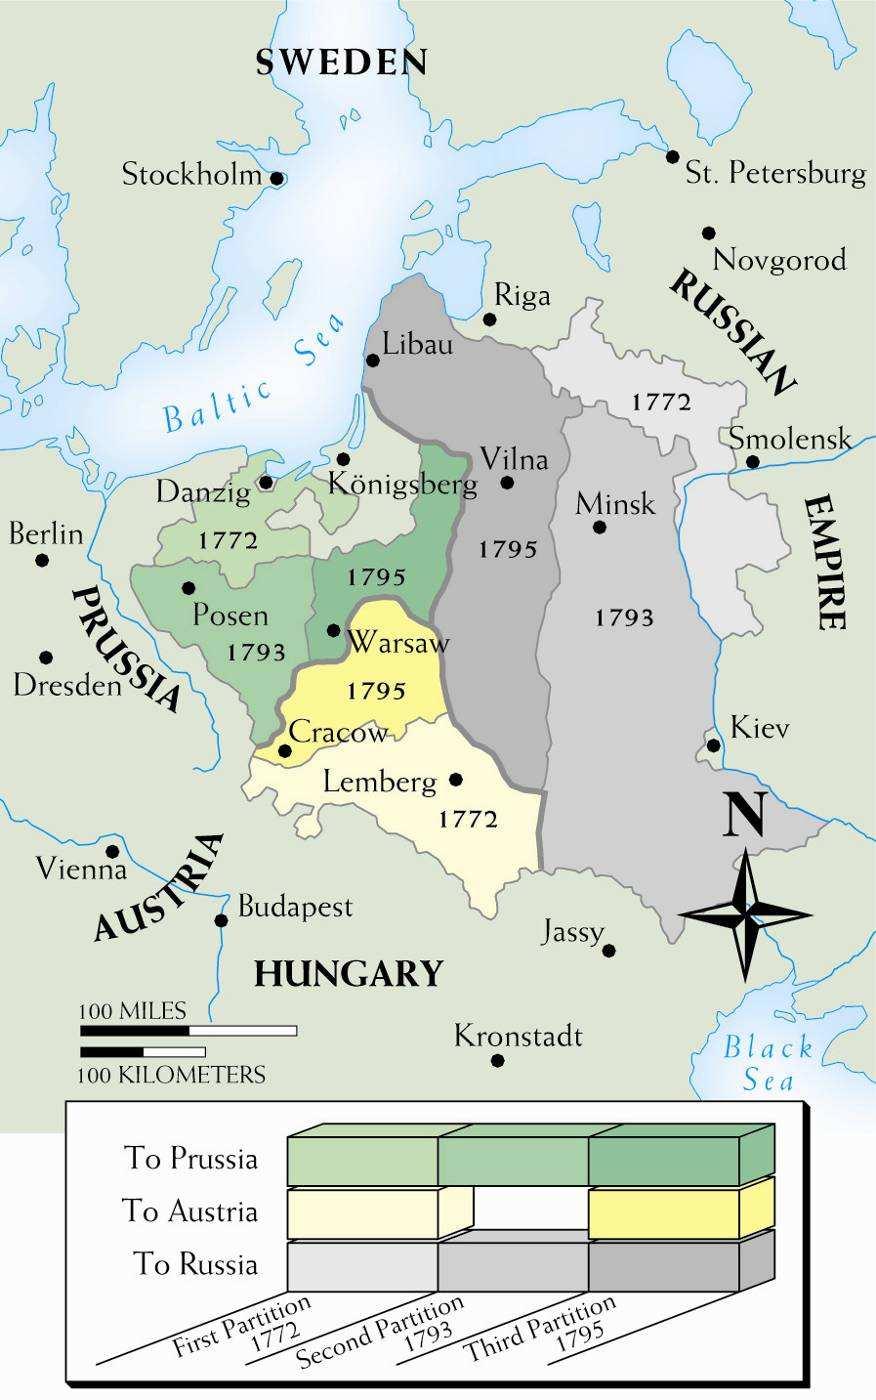 The Partition of Poland Land split by Russia, Austria, and Prussia Proved that without a strong bureaucracy, monarchy and army, a nation could not survive The End of the Eighteenth Century in Central